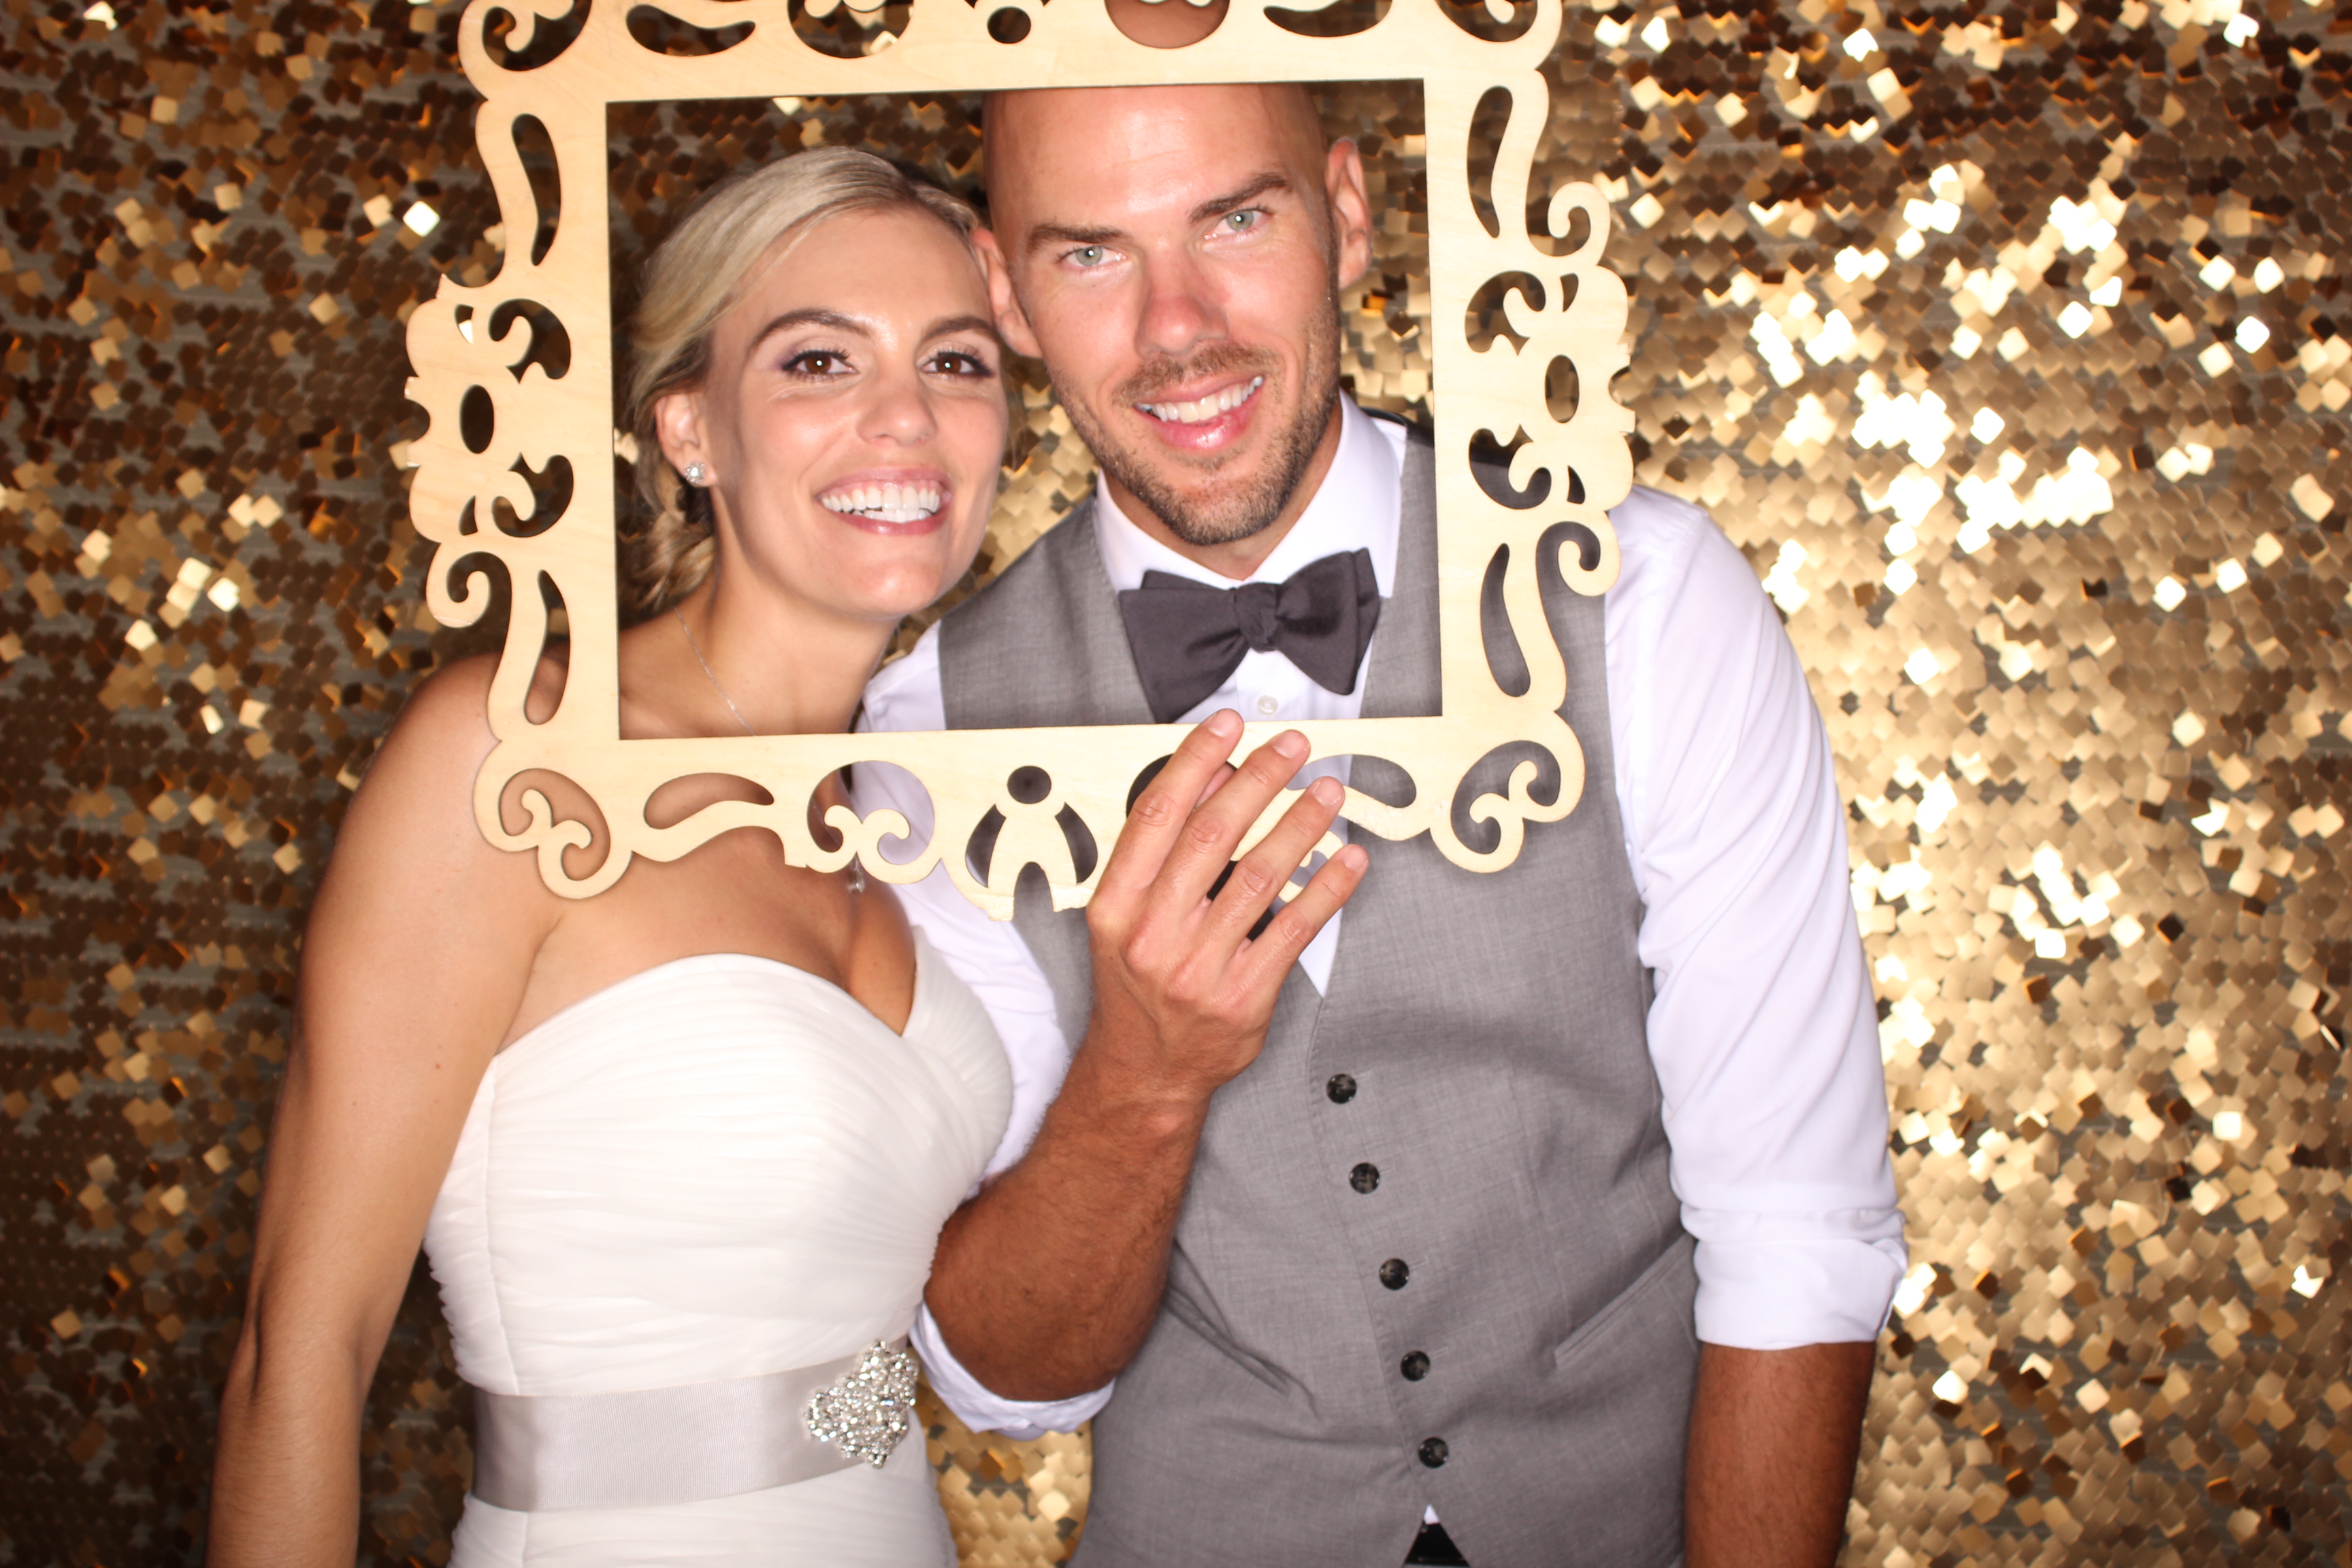 Photo Booth Rental in Orange County, CA